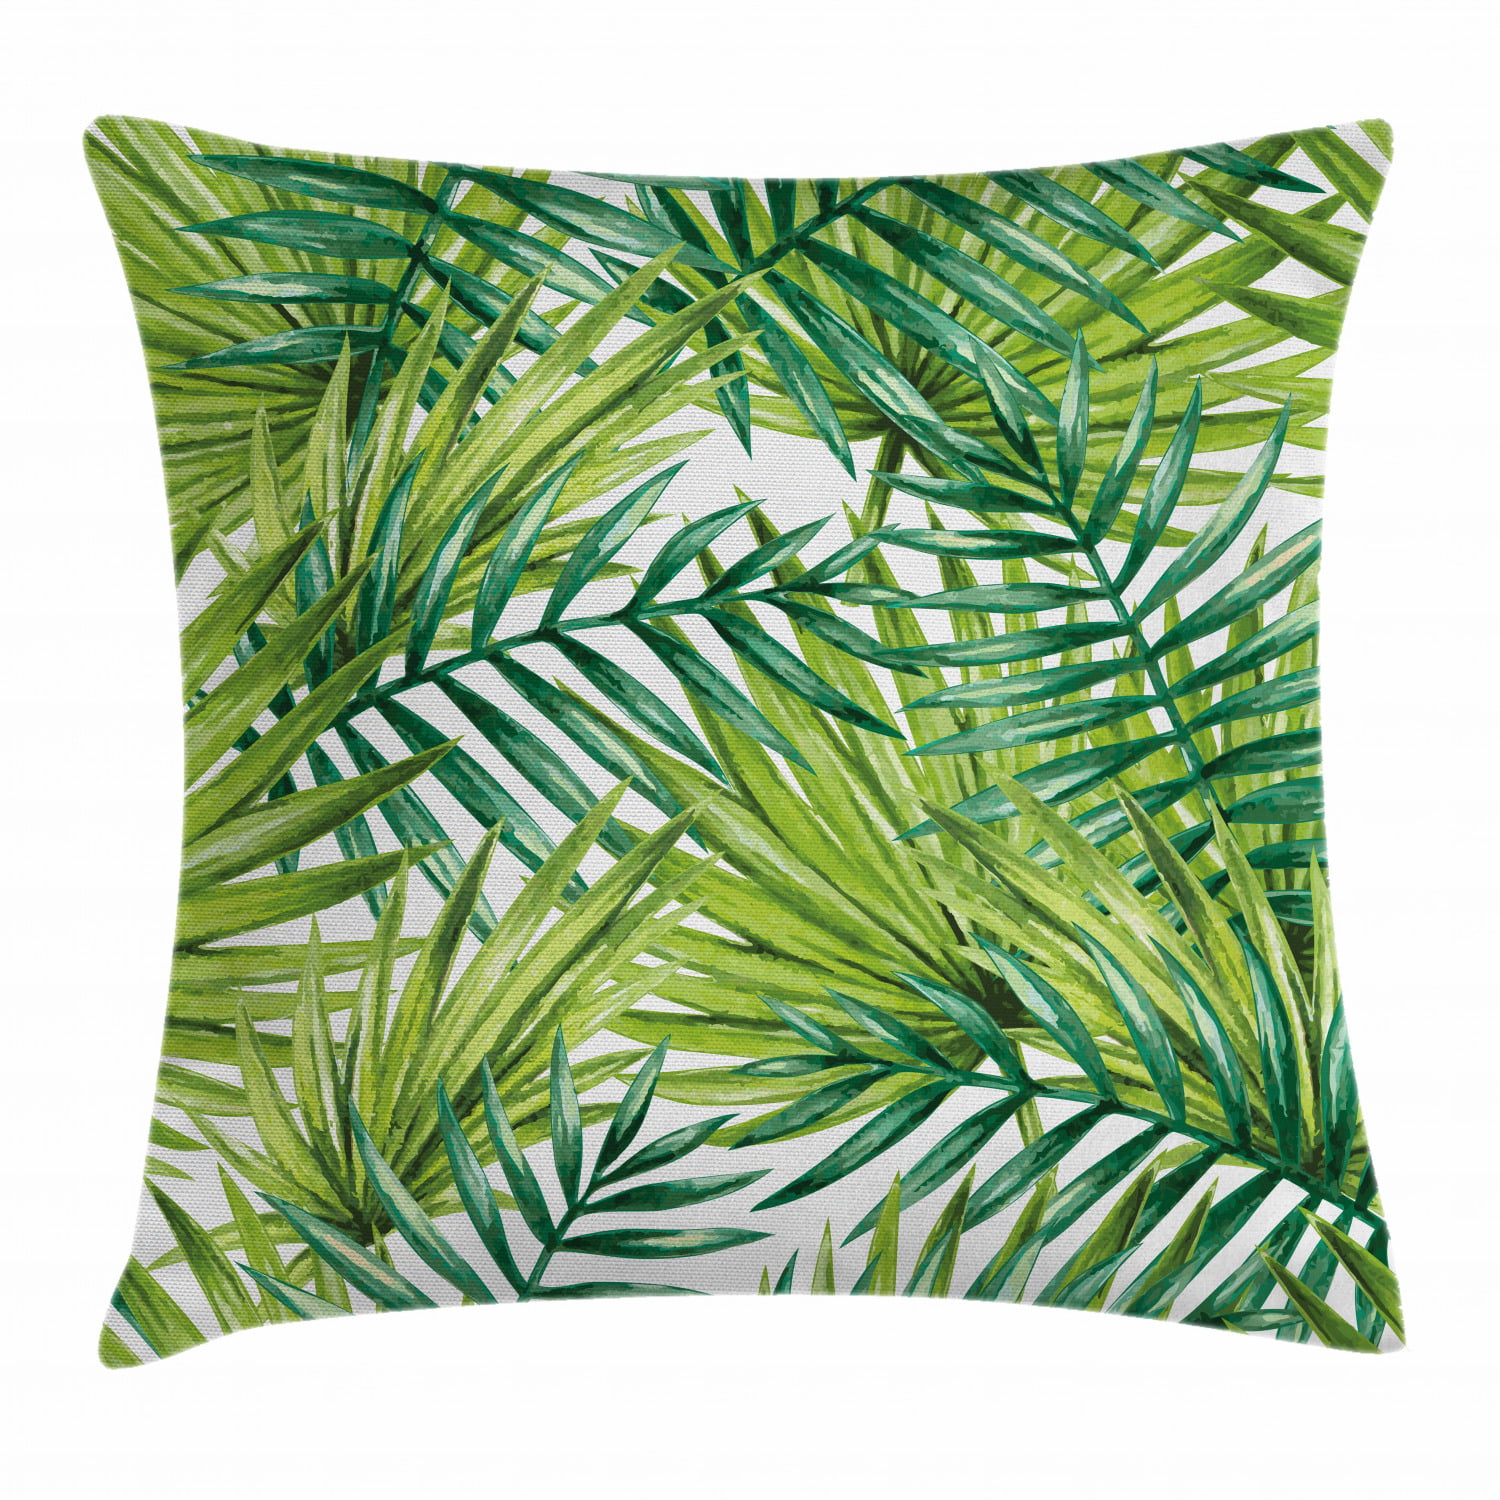 Moroccan Embroidered Cushion Cover Tropical Botanical Palm Leaf Design Green 